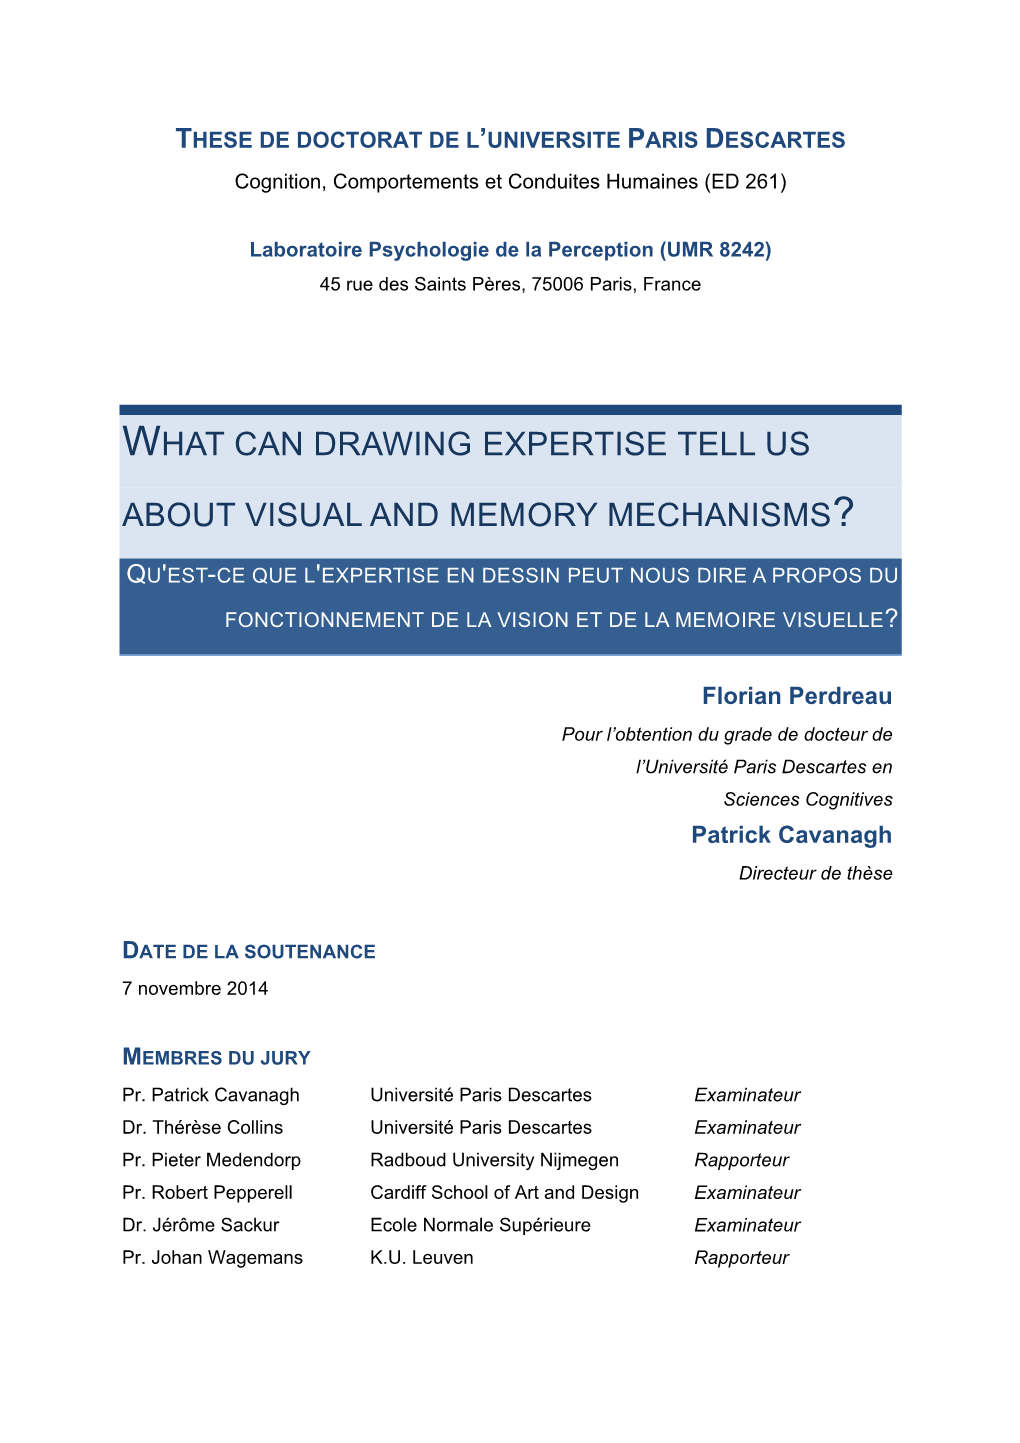 What Can Drawing Expertise Tell Us About Visual and Memory